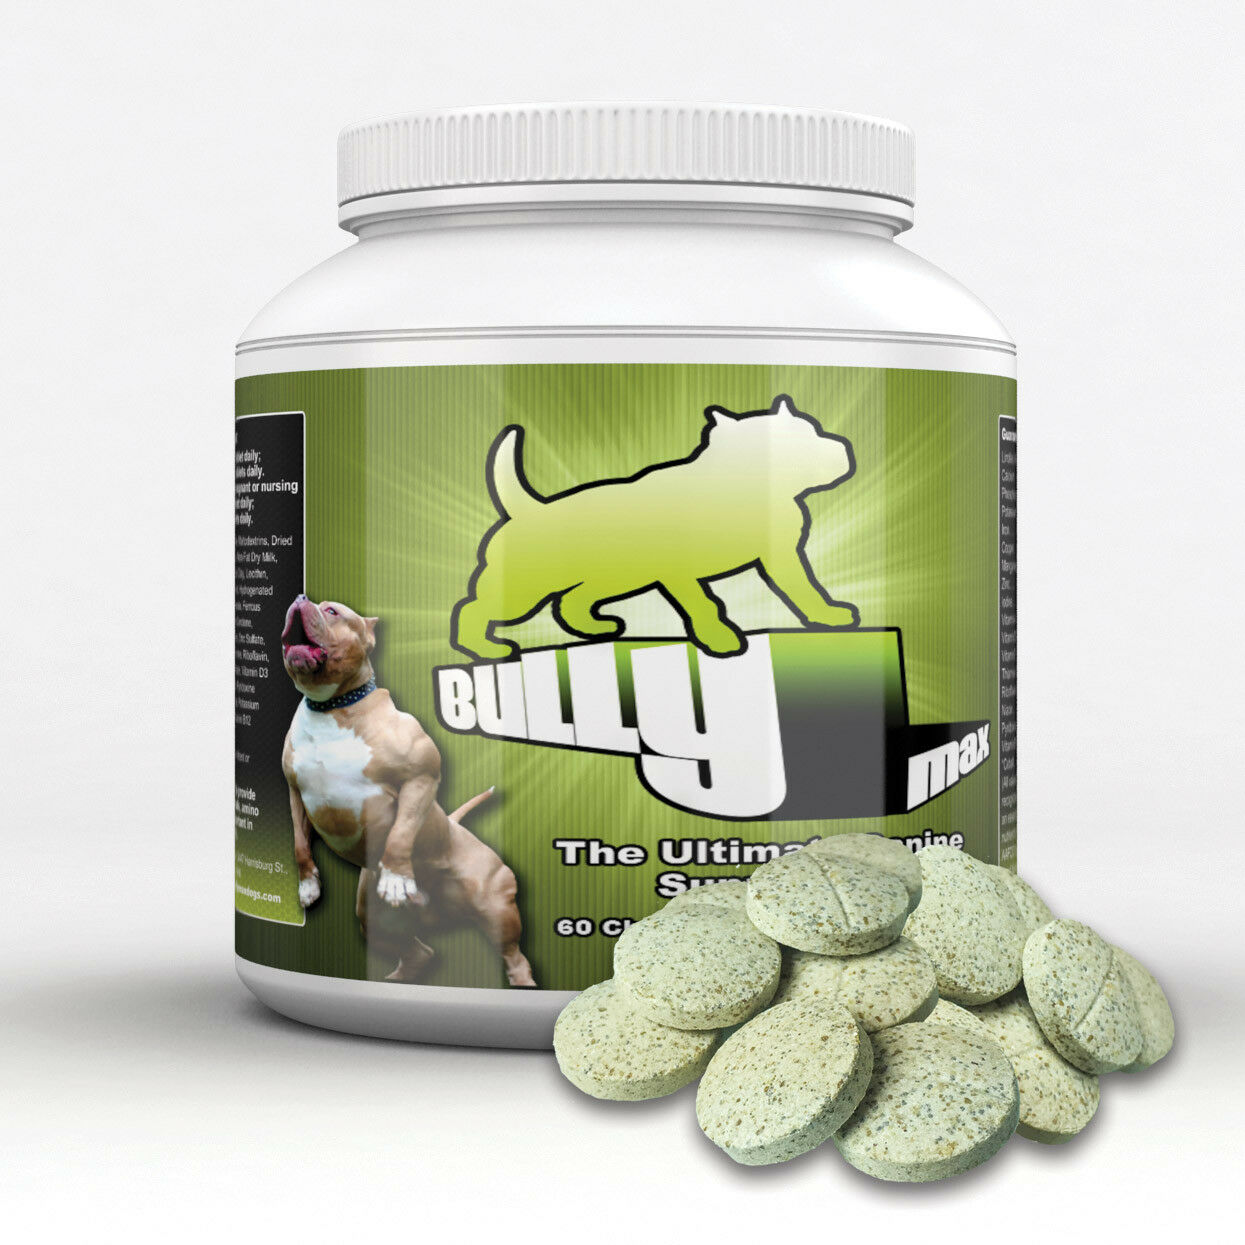 Bully Max Muscle Builder For Dogs. 60 Tabs. Buy Directly From The Manufacturer.